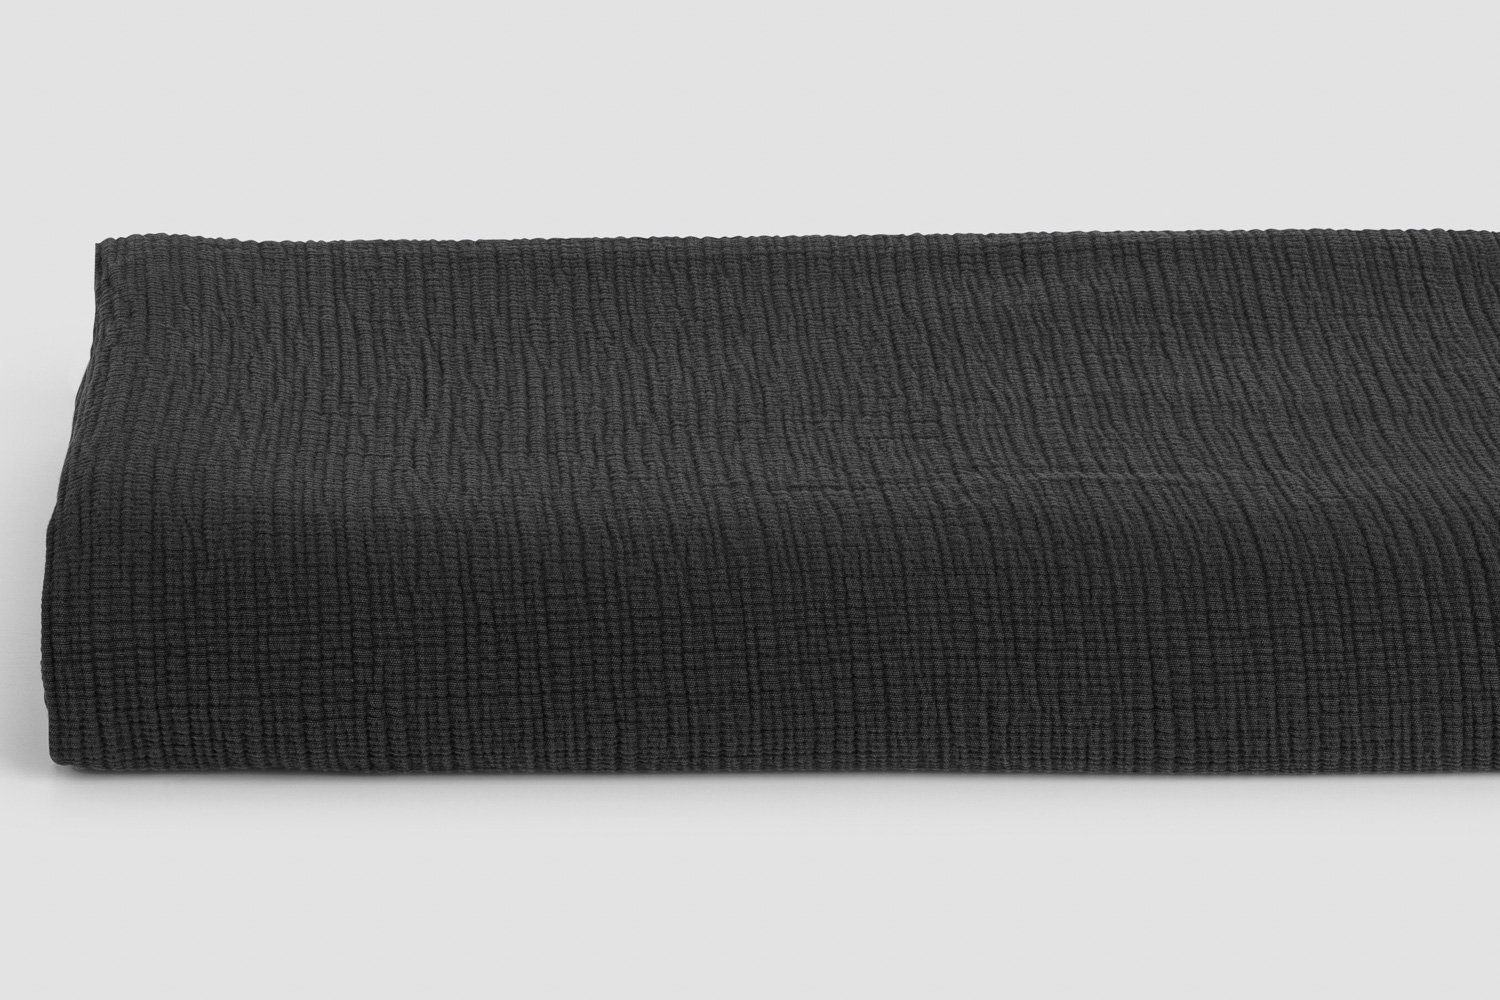 ripple duvet in charcoal colour